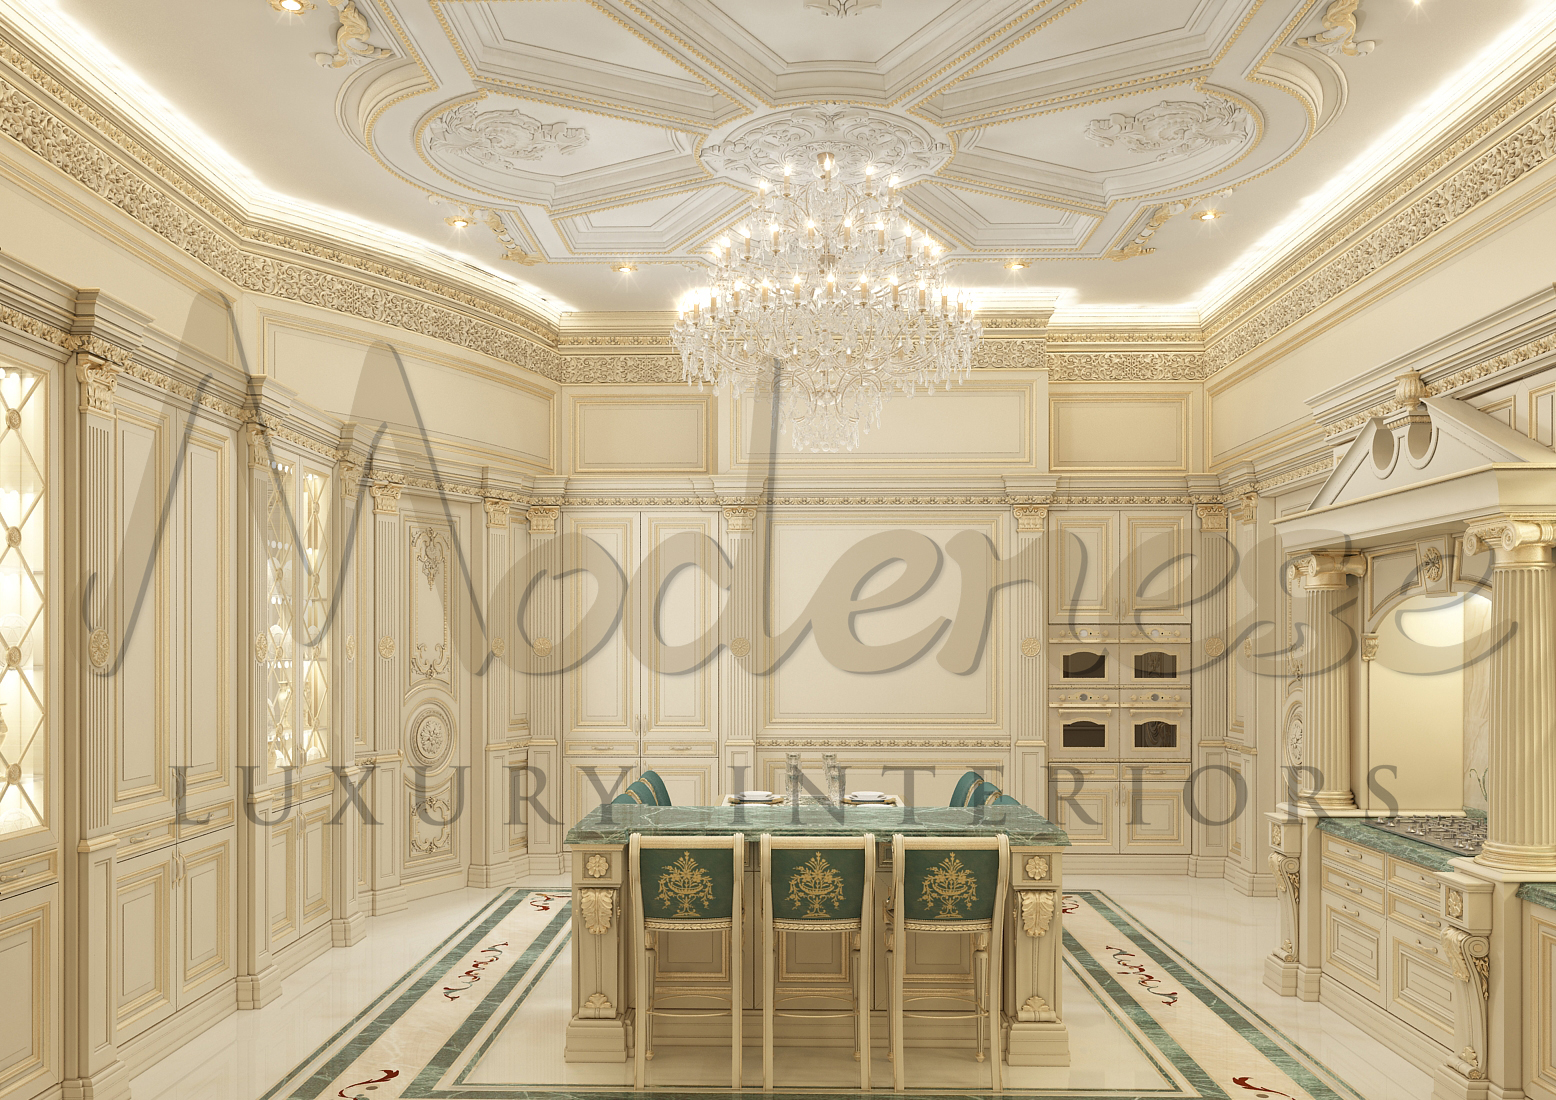 Elegant royal customized artisanal kitchen production, refined details all in solid wood. Handmade carved kitchen structure, bespoke artisanal furniture production.Custom-made solid wood tables, refined handmade joinery and boiserie.